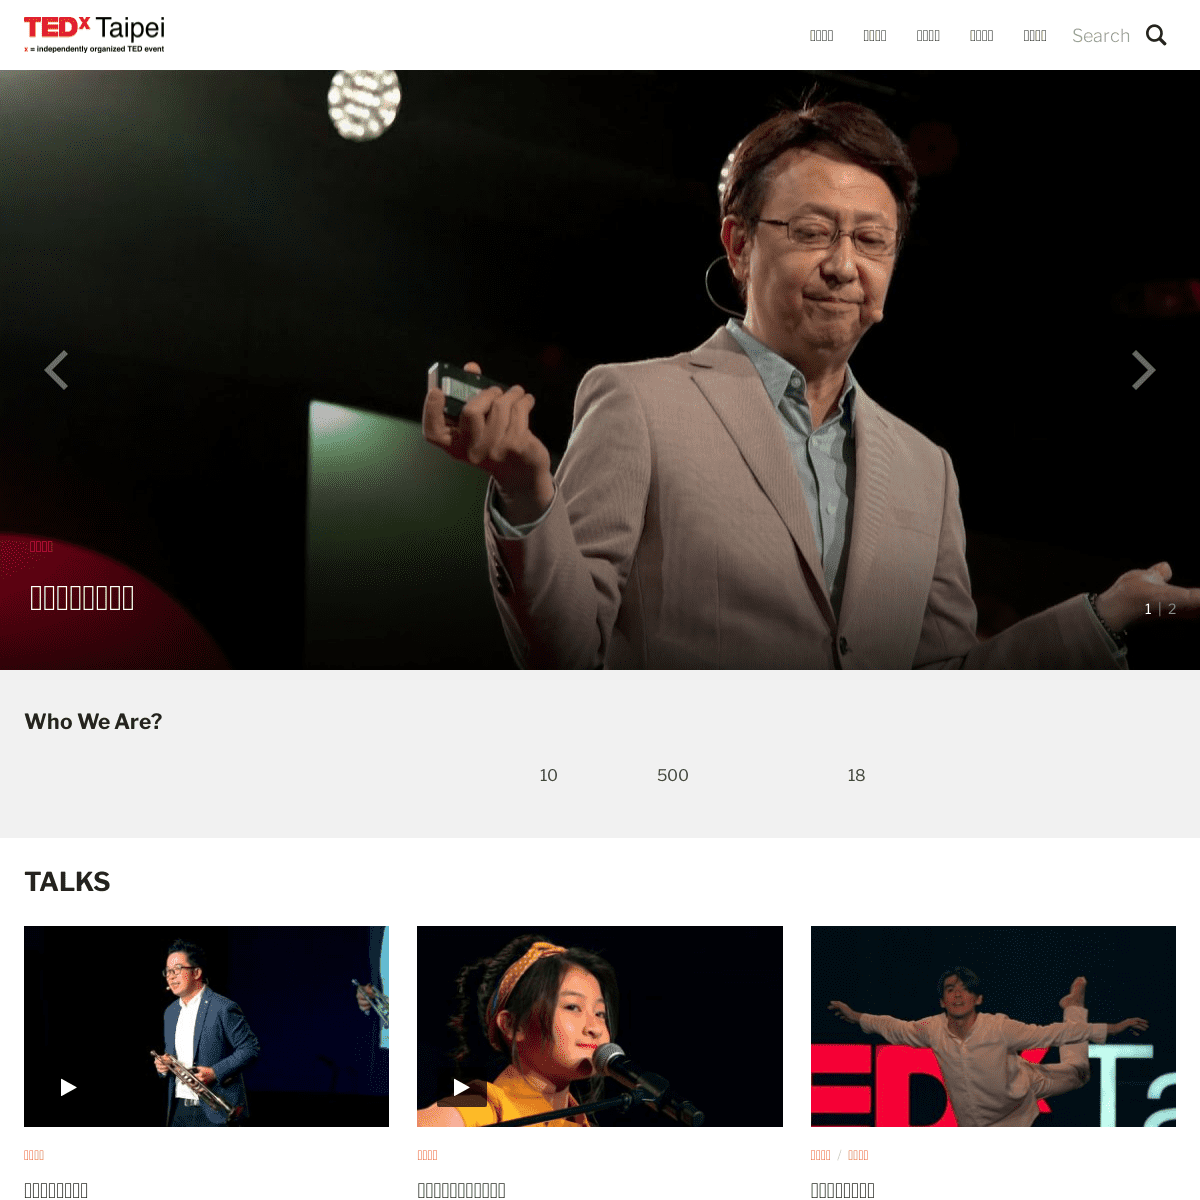 A complete backup of https://tedxtaipei.org